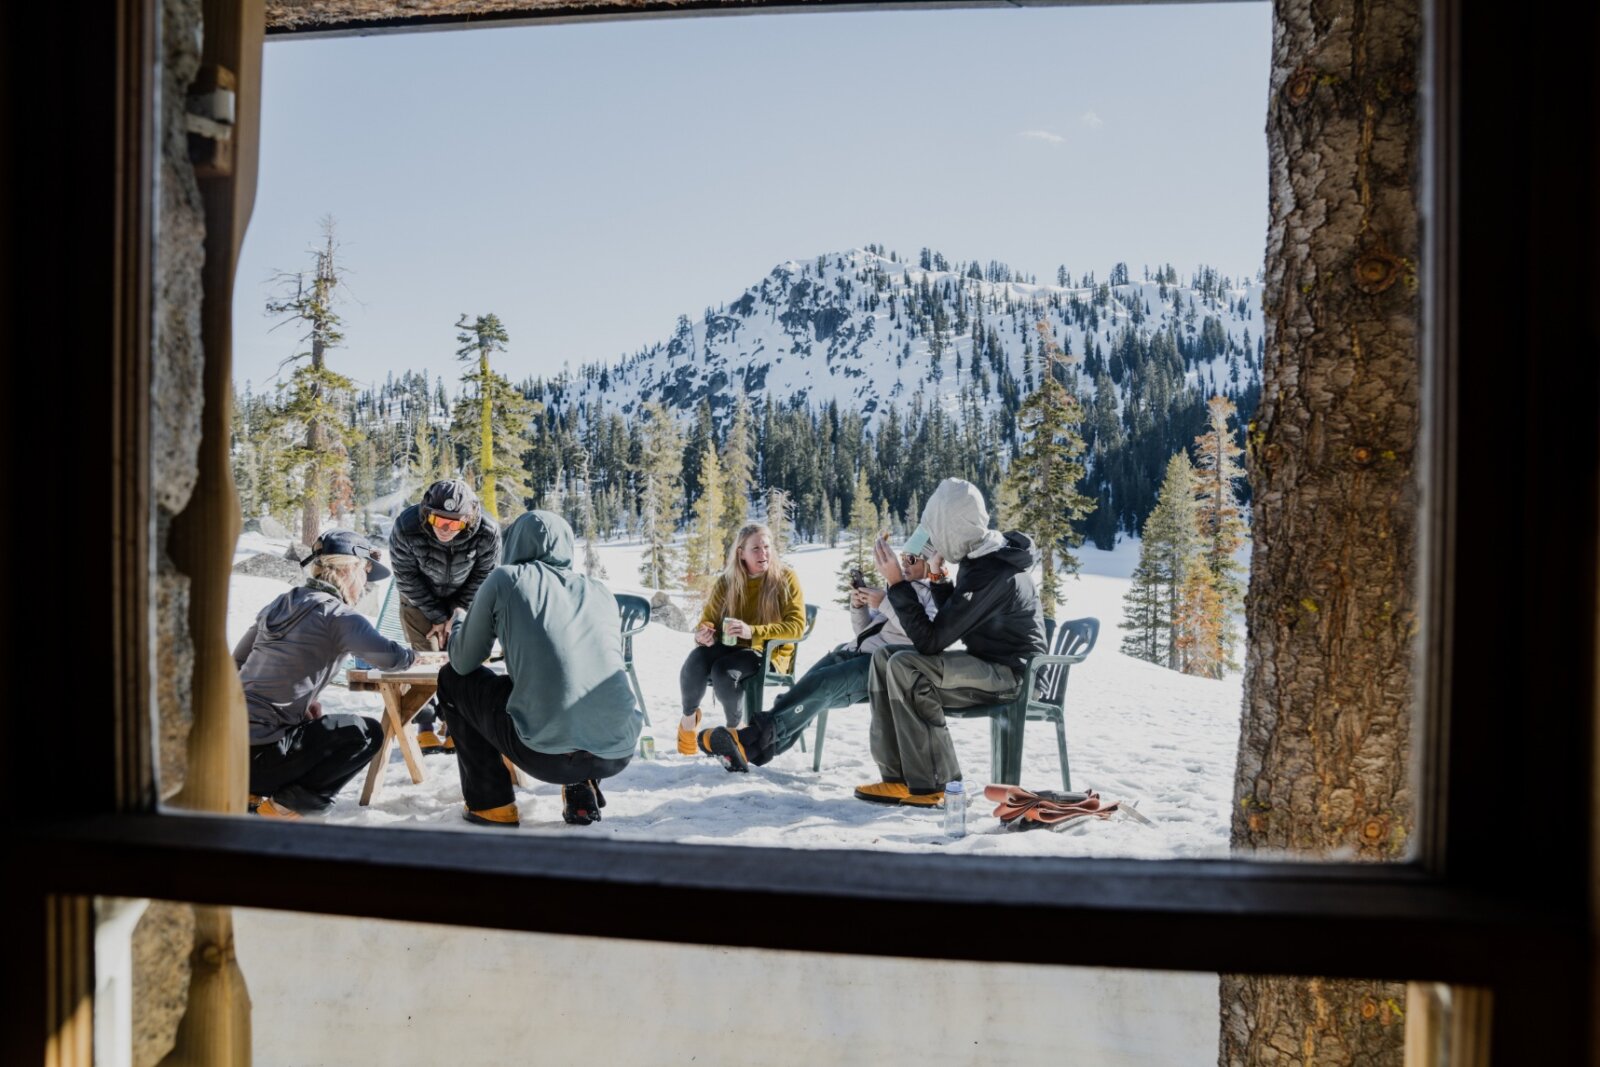 Come ski with our professional ski guides on this epic 4-day, 3-night backcountry winter hut trip based at Frog Lake in Lake Tahoe.